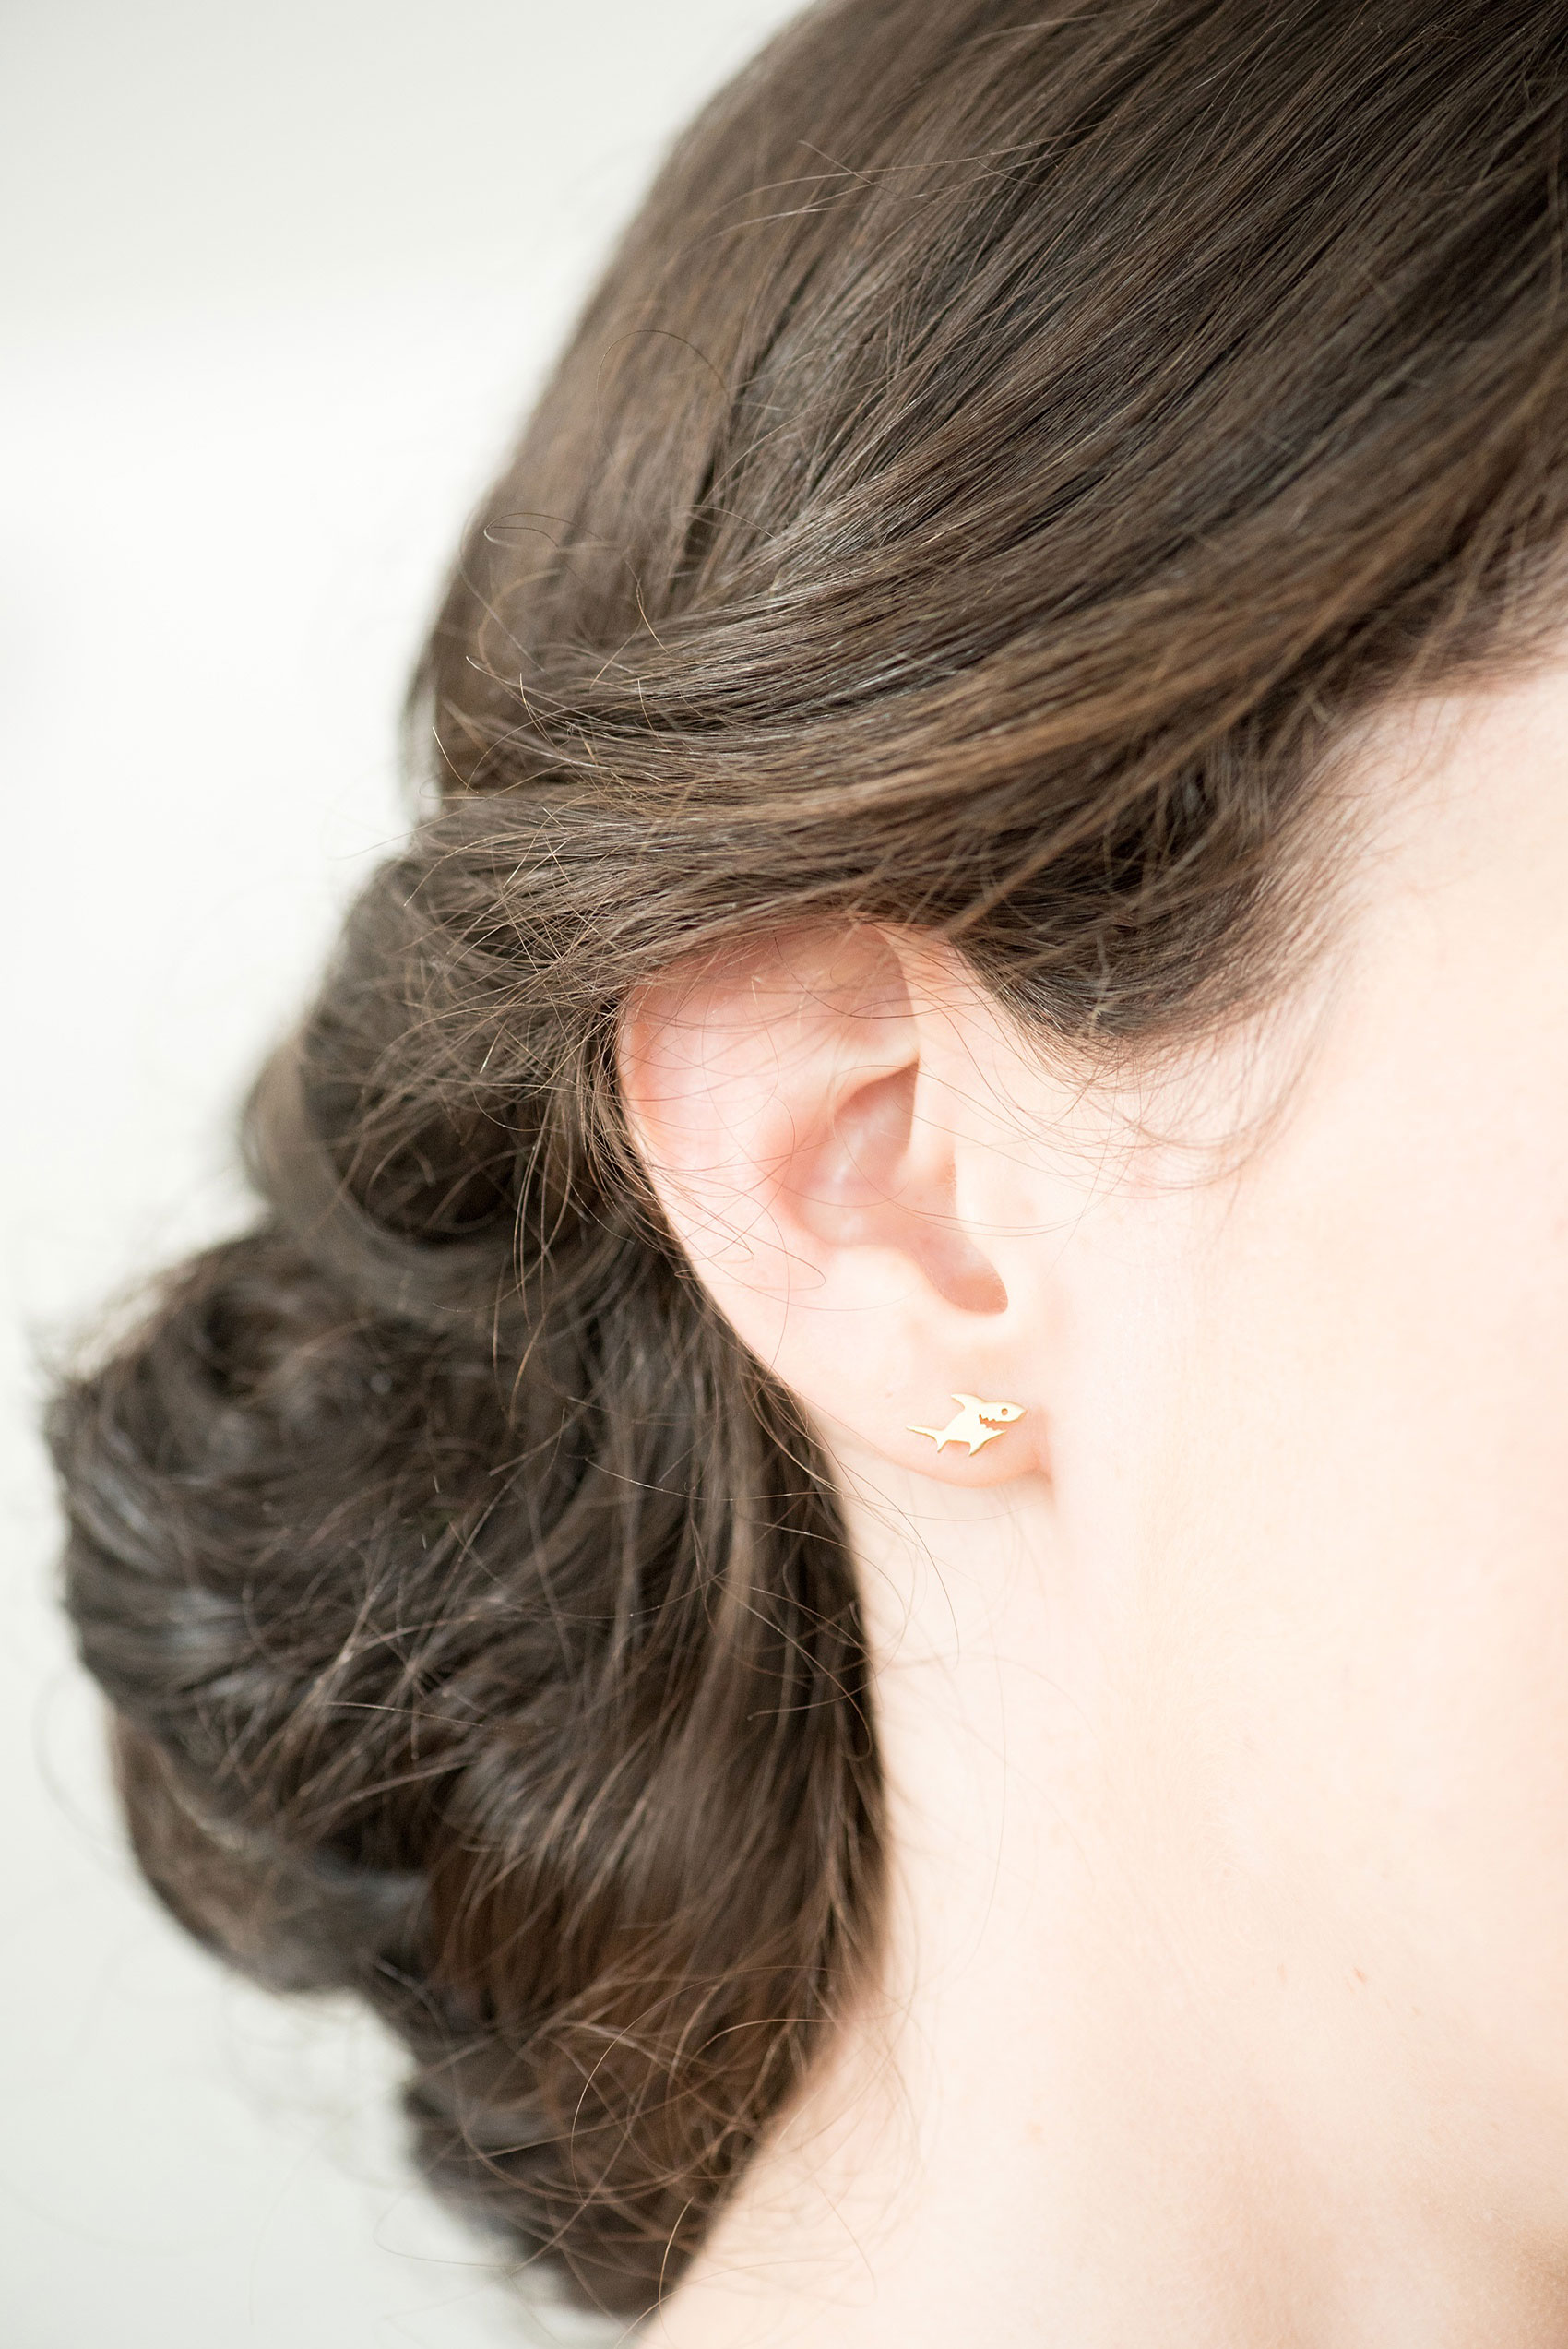 Pavilion at Angus Barn wedding photos by Mikkel Paige Photography. Detail picture of the bride's shark earrings.